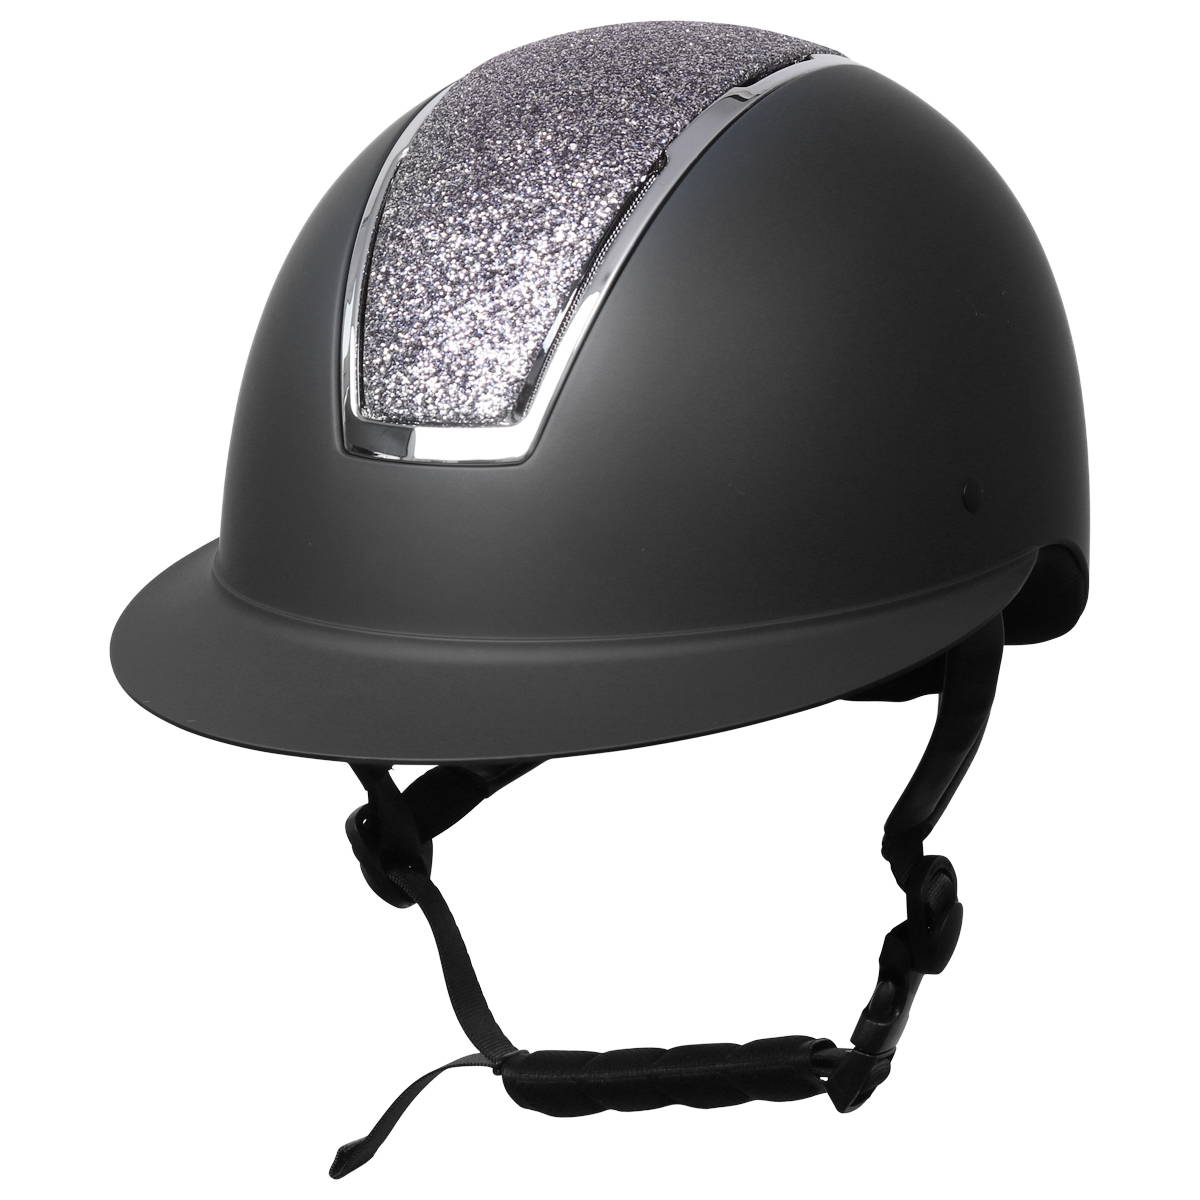 SILVER GREY & BLACK RIDING HAT COVER 